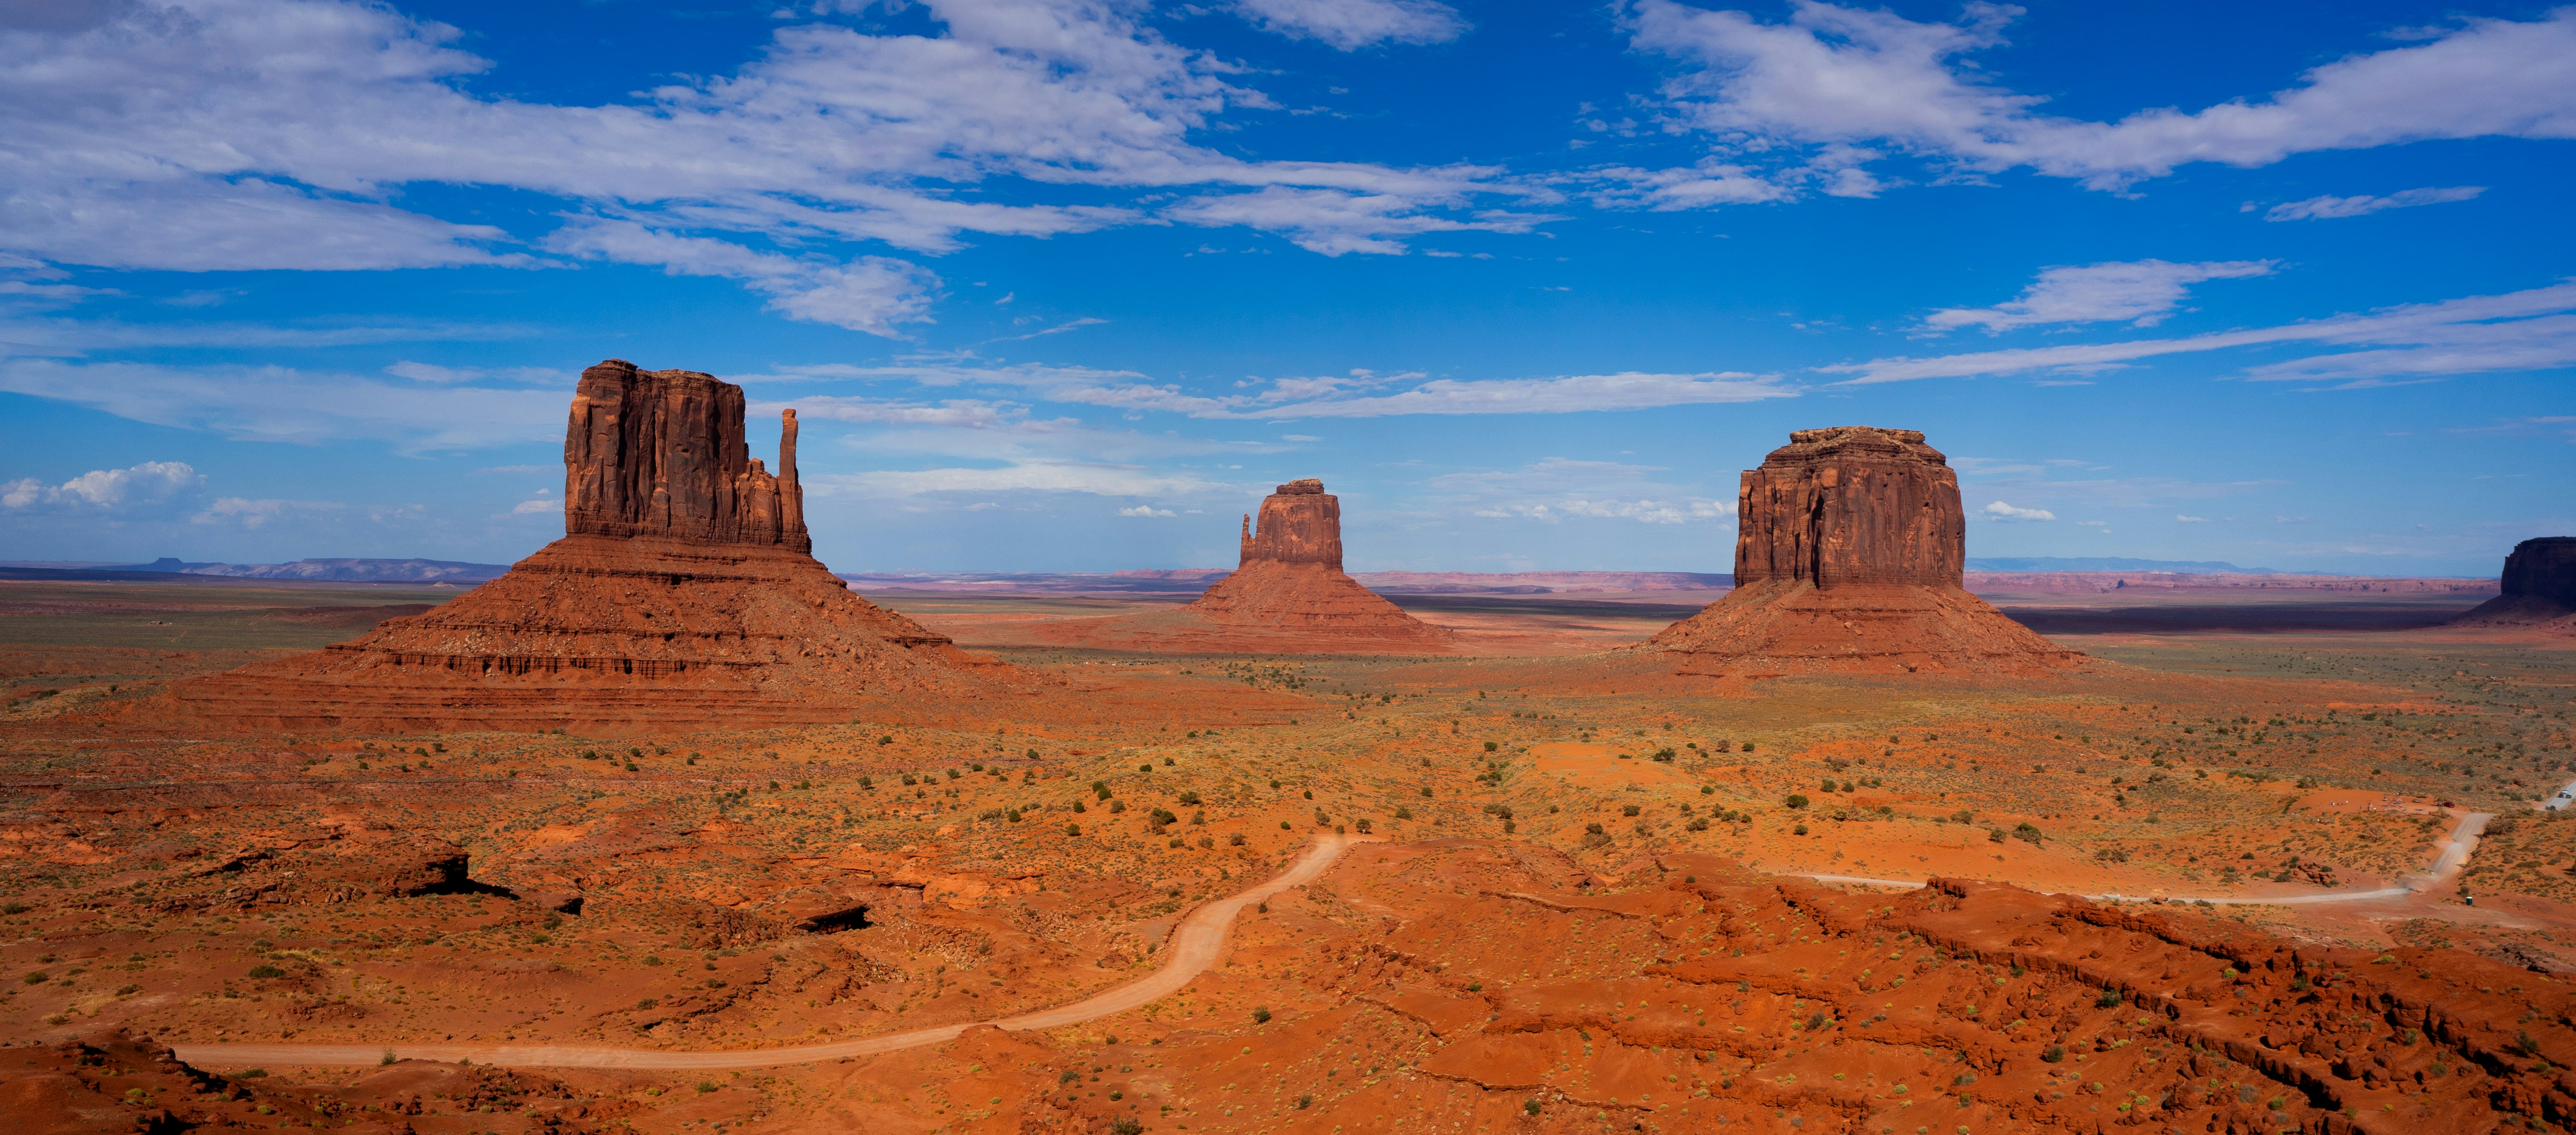 monument valley hotel view